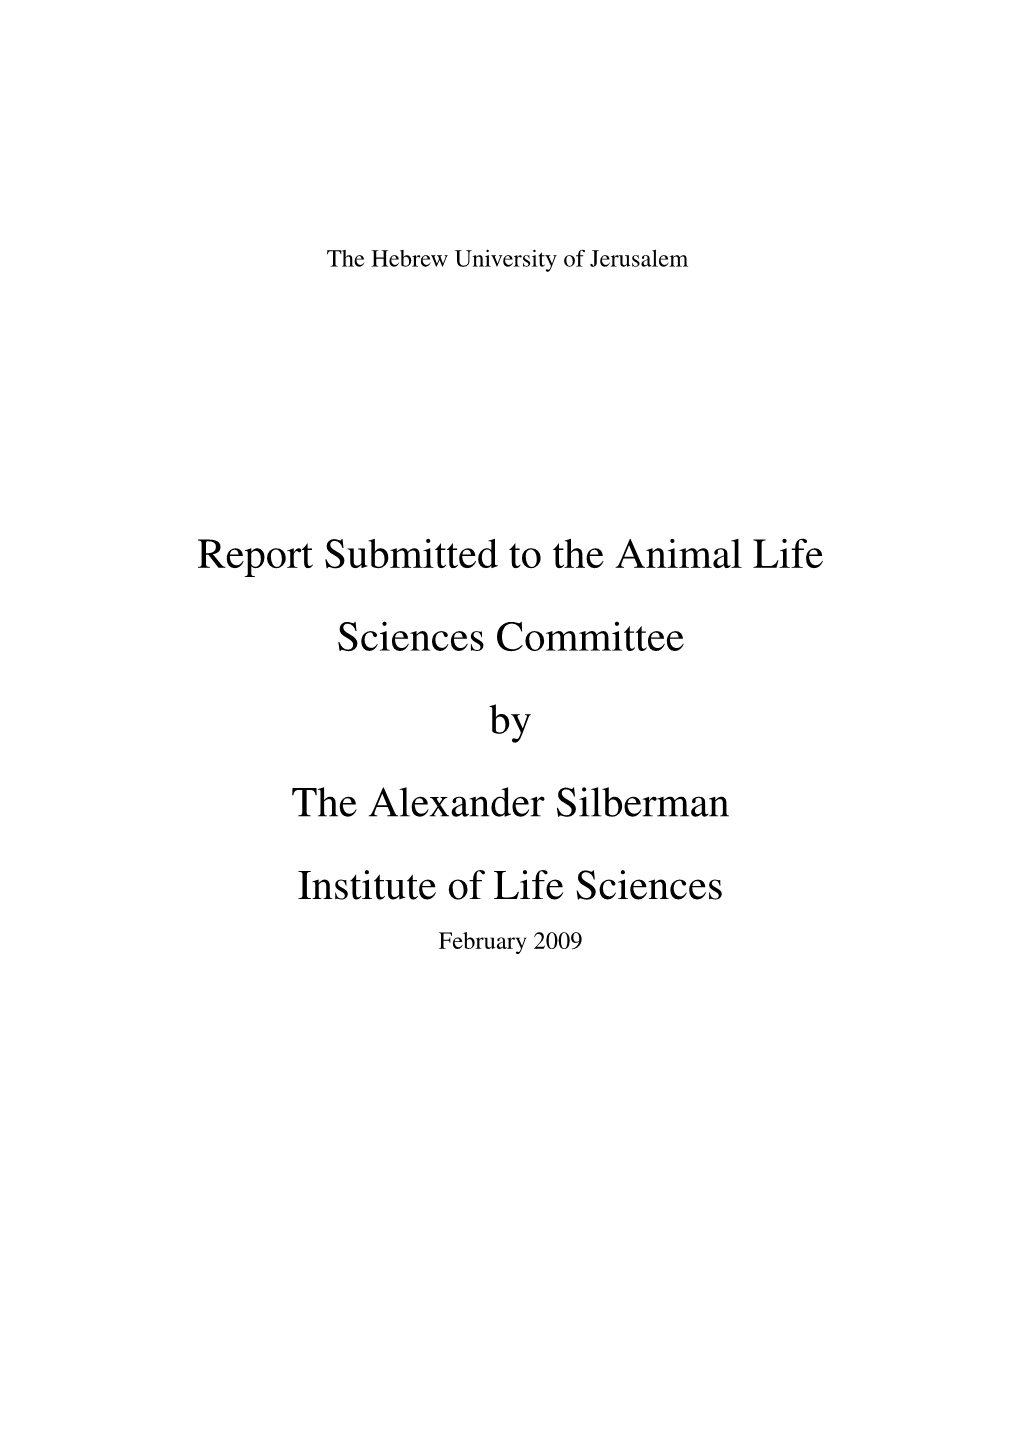 Report Submitted to the Animal Life Sciences Committee by the Alexander Silberman Institute of Life Sciences February 2009 Contents